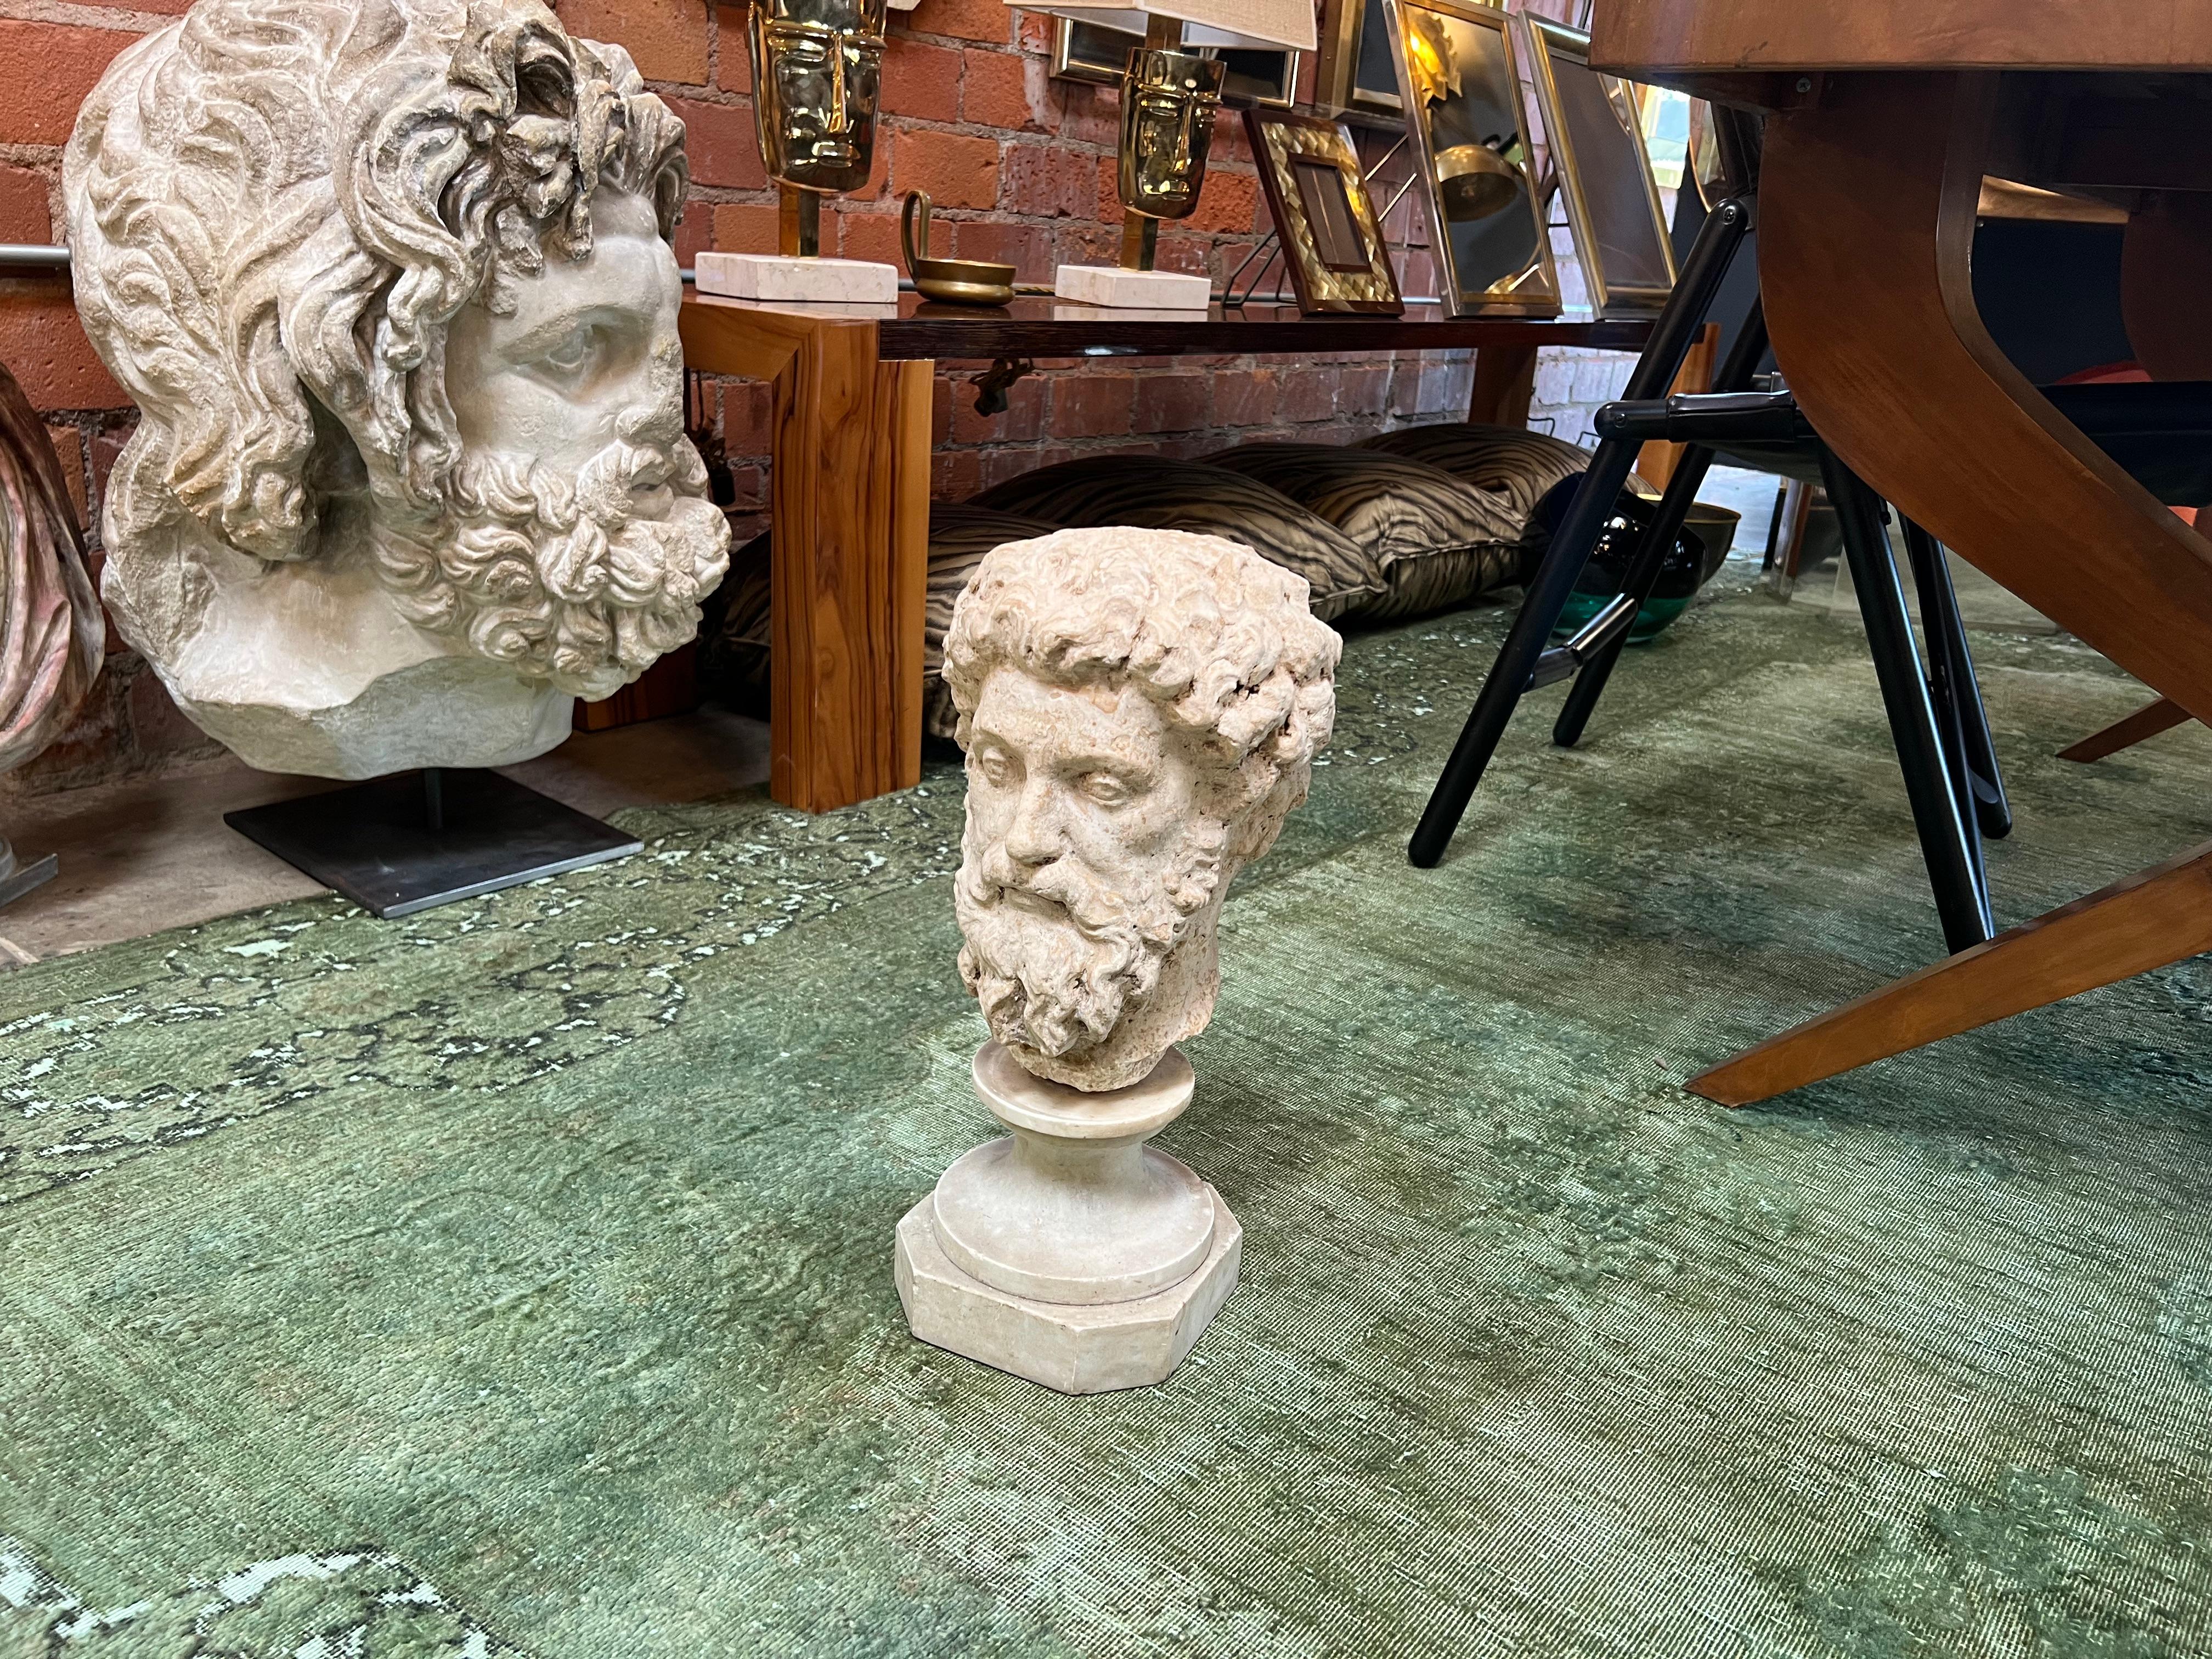 The Mid Century Roman Marcus Aurelius Head Sculpture from the 1950s is a striking artistic representation of the ancient Roman emperor's likeness. Crafted in the iconic style of the mid-20th century, it captures the essence of both historical and